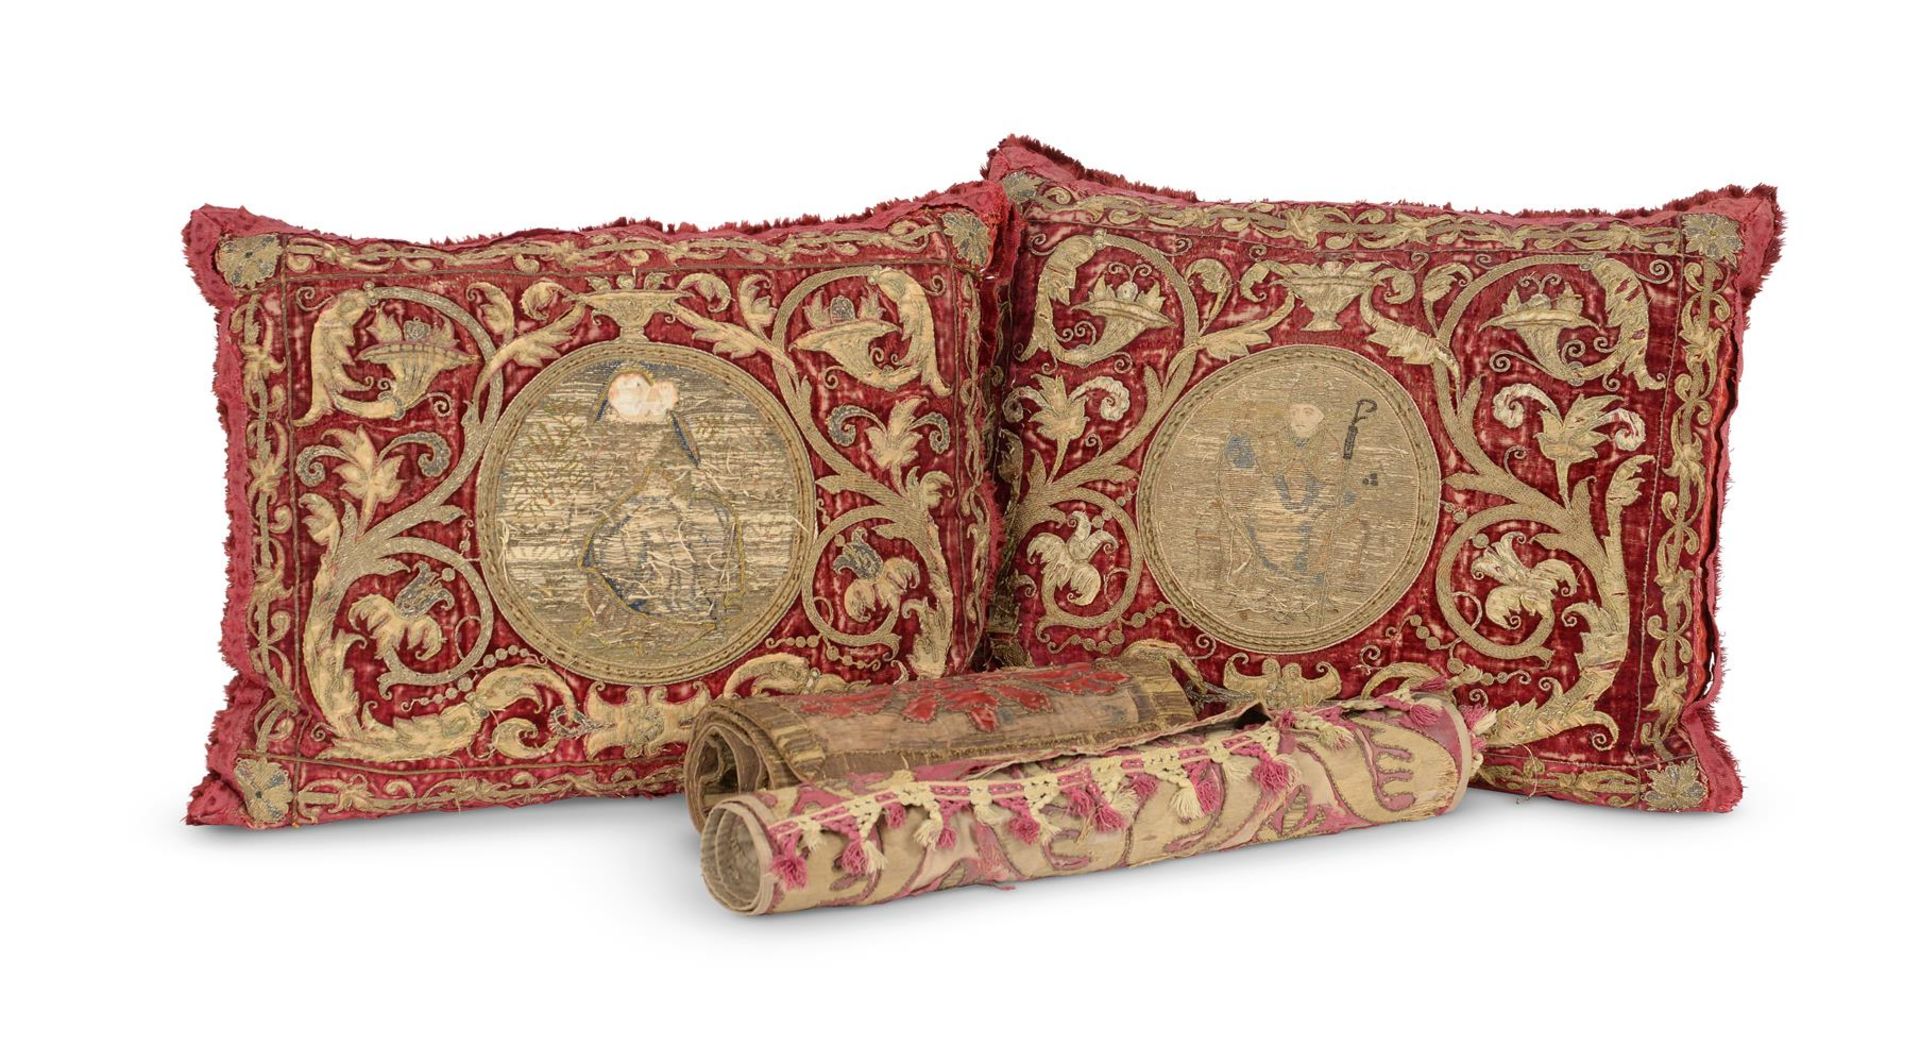 TEXTILES TO INCLUDE EARLY ORPHREY FRAGMENTS, LATE 16TH CENTURY AND LATER